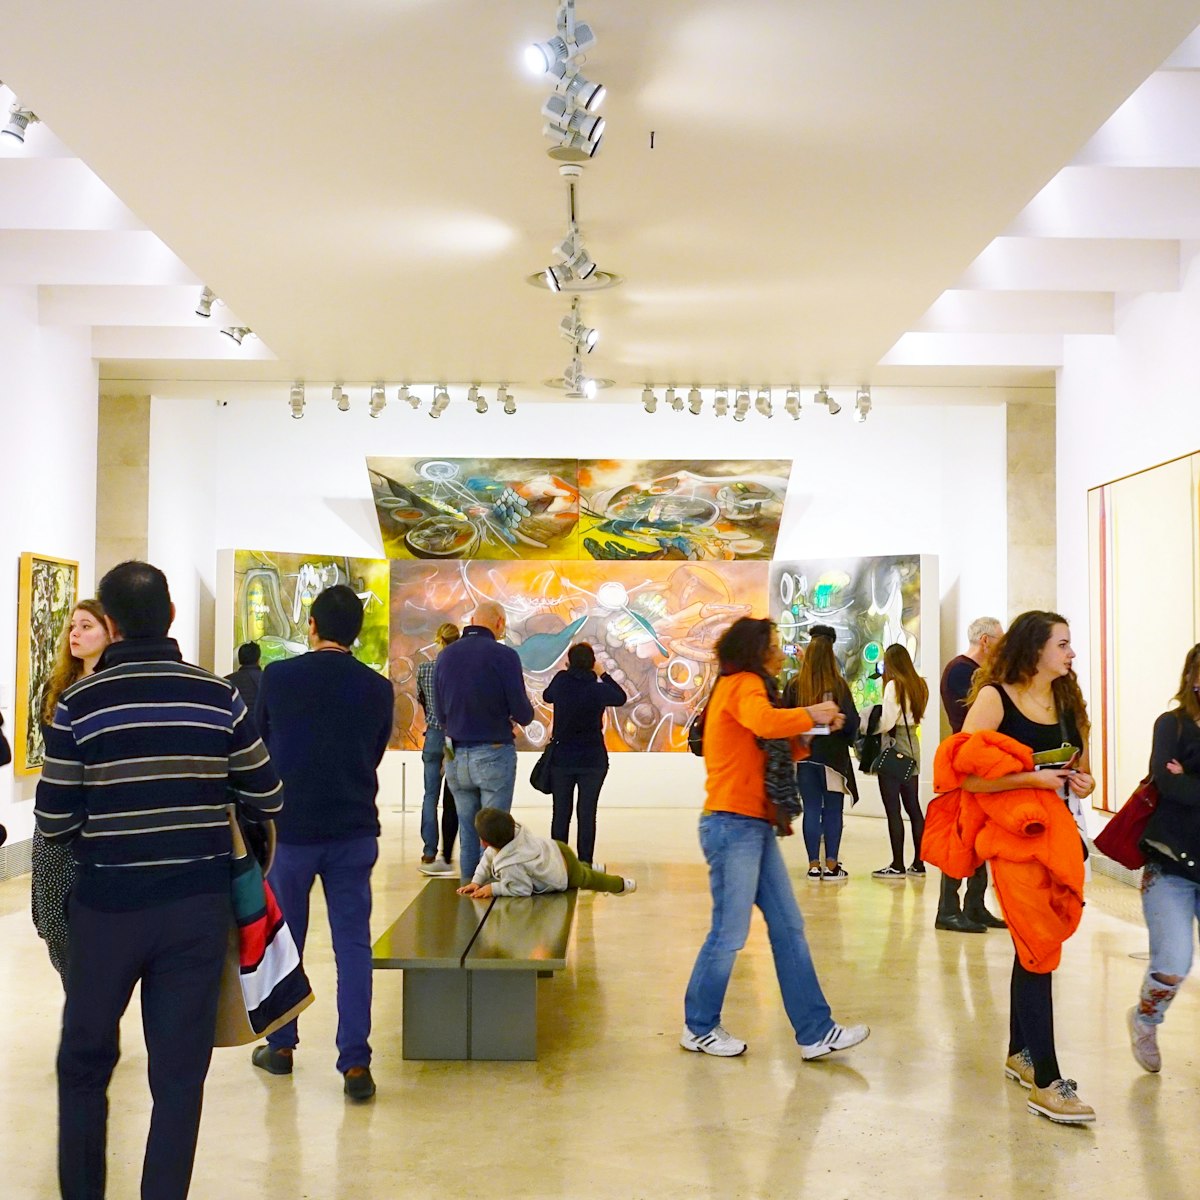 Visitors look at the pictures in the museum Thyssen-Bornemisza.